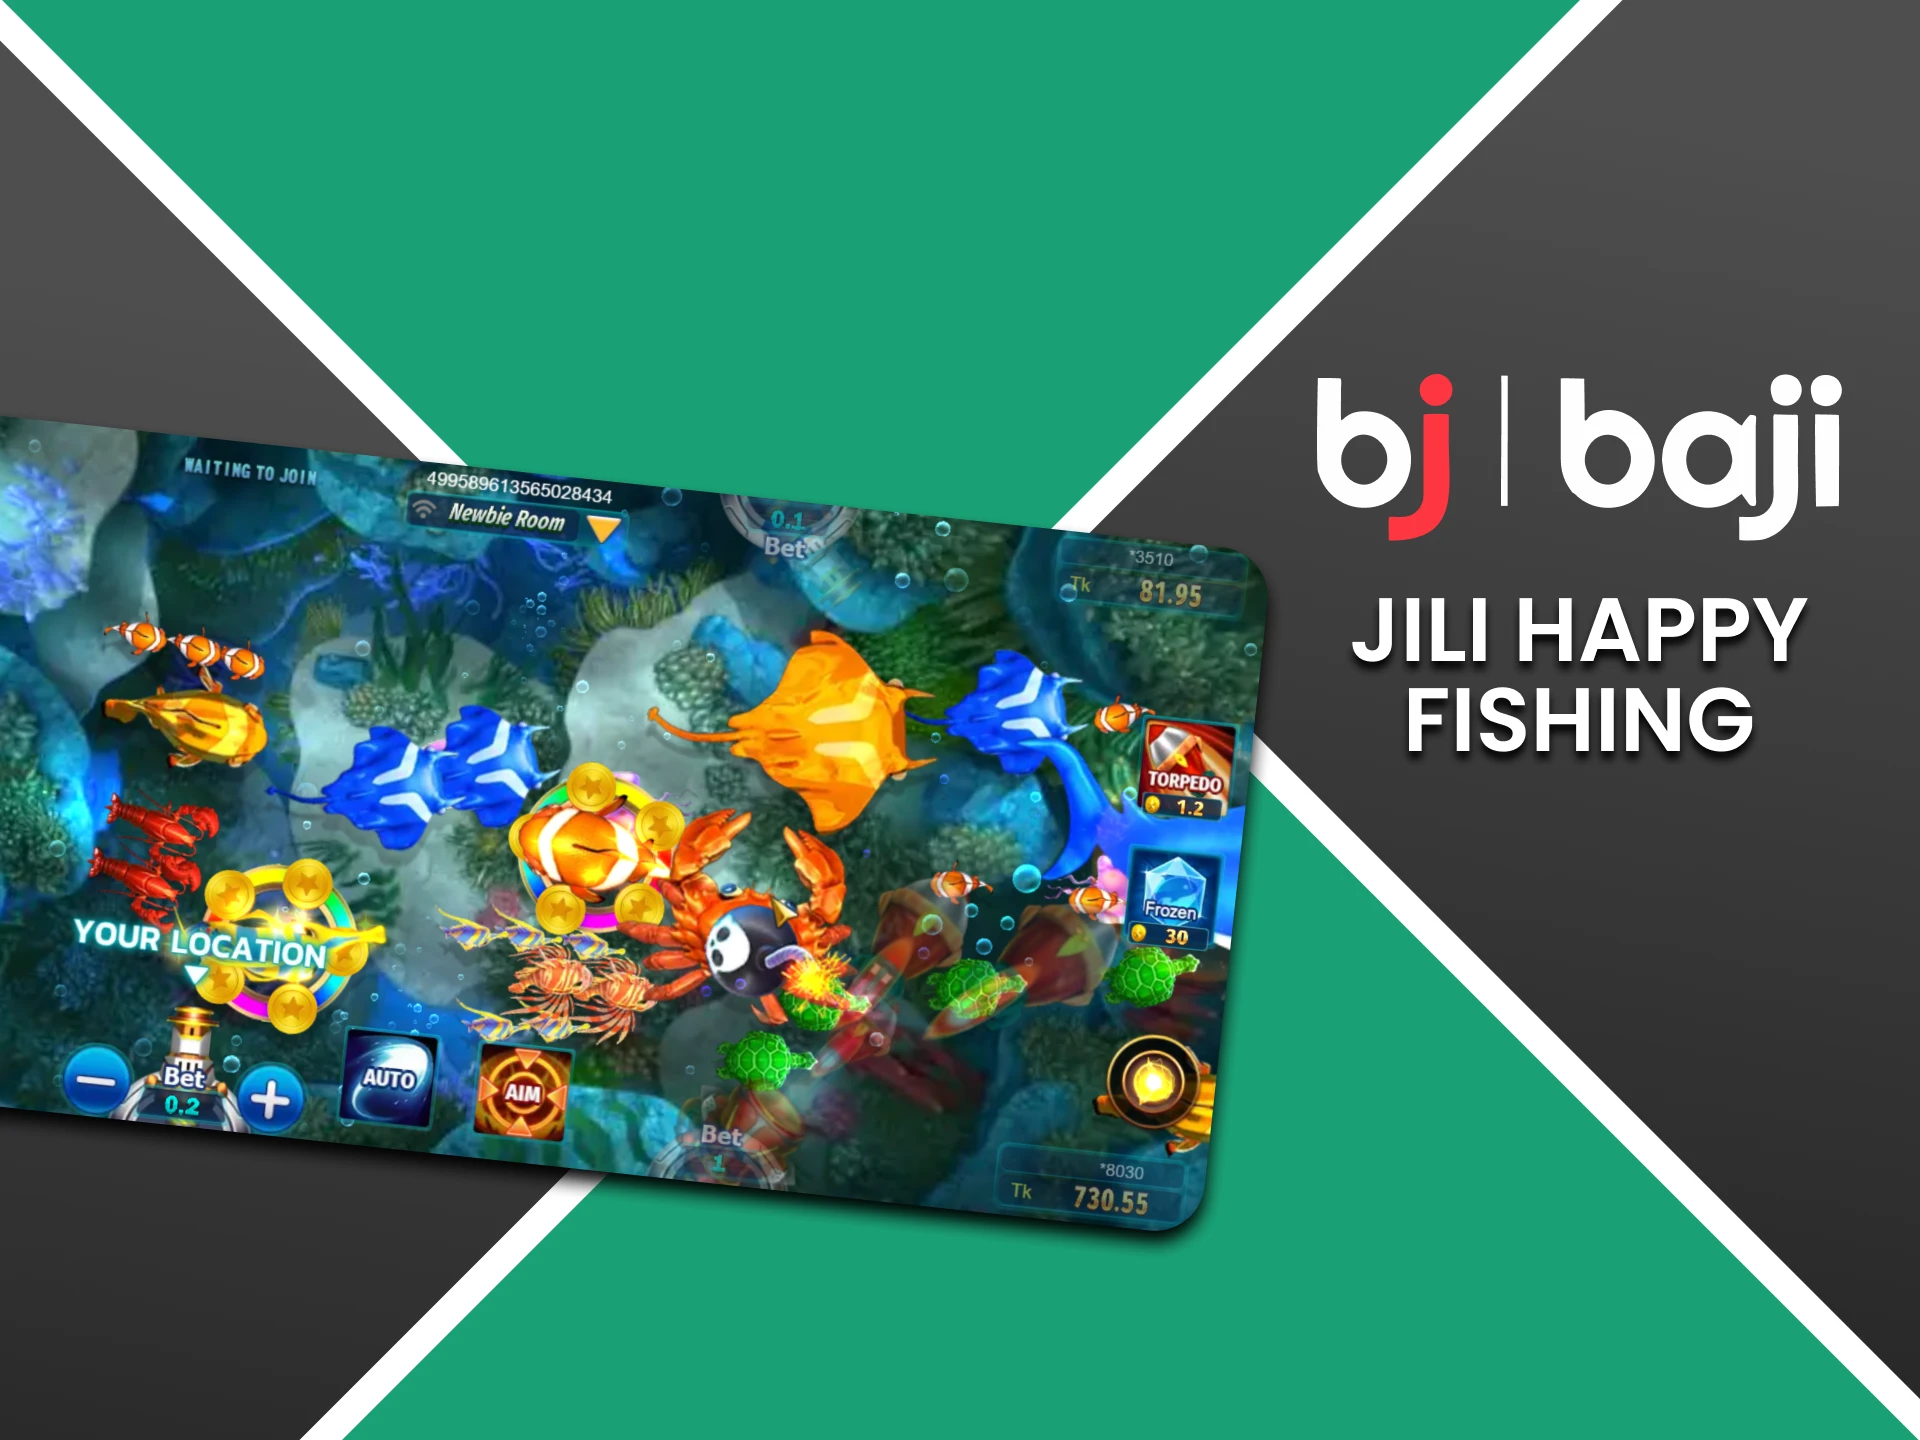 In the fishing section from Baji, select the game Happy Fishing.